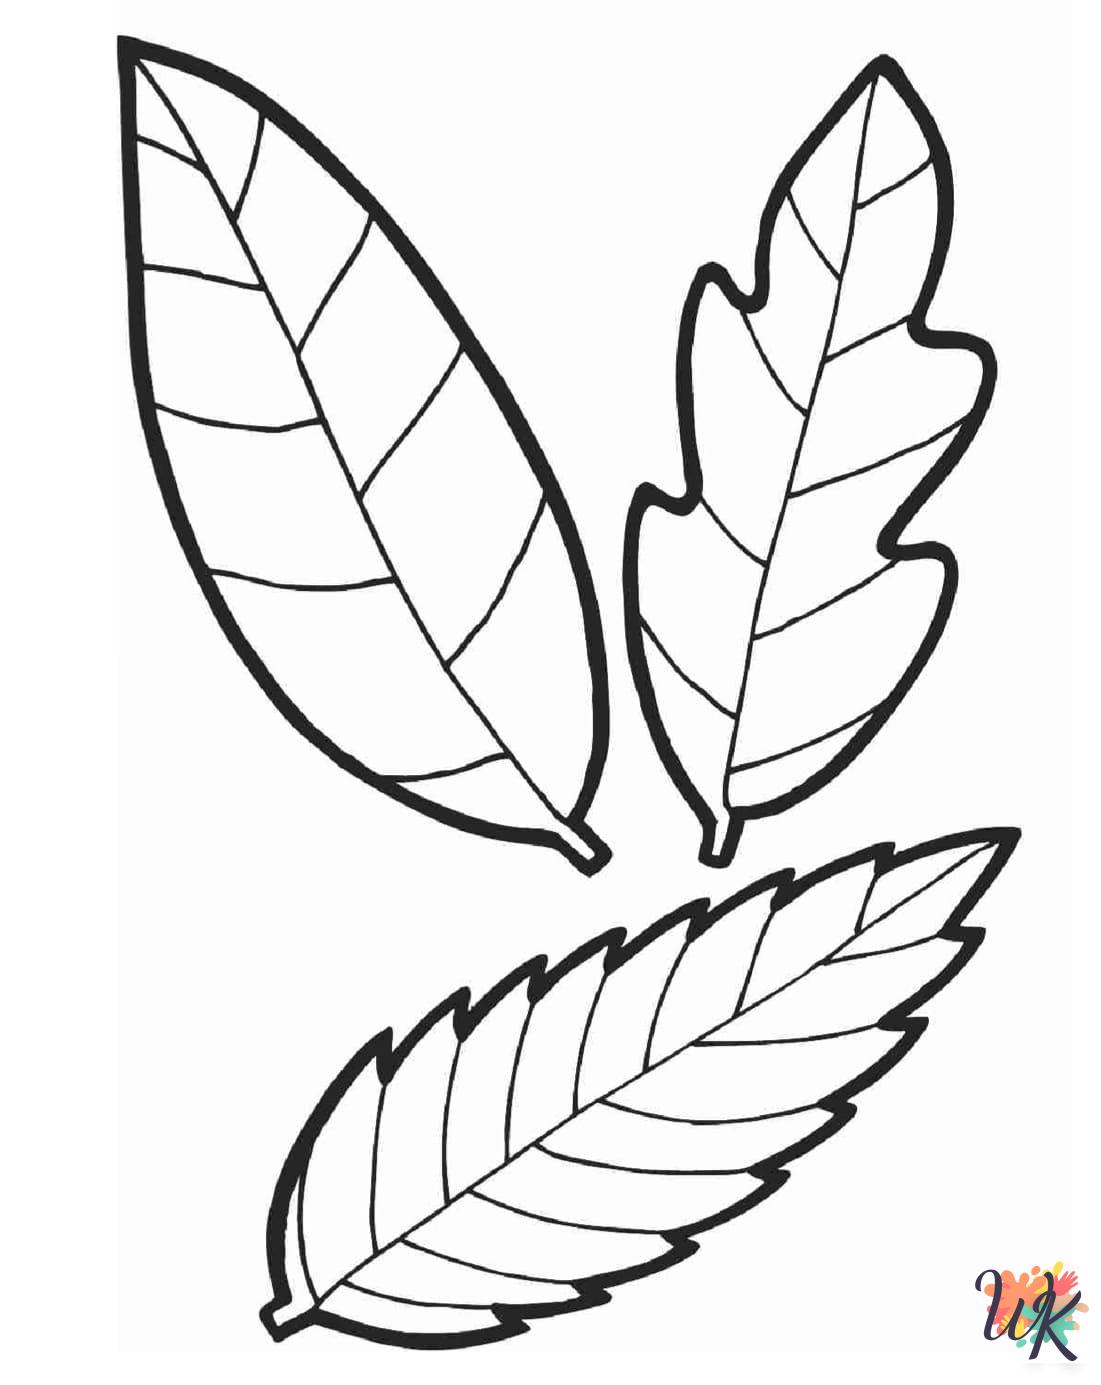 fun Fall Leaves coloring pages